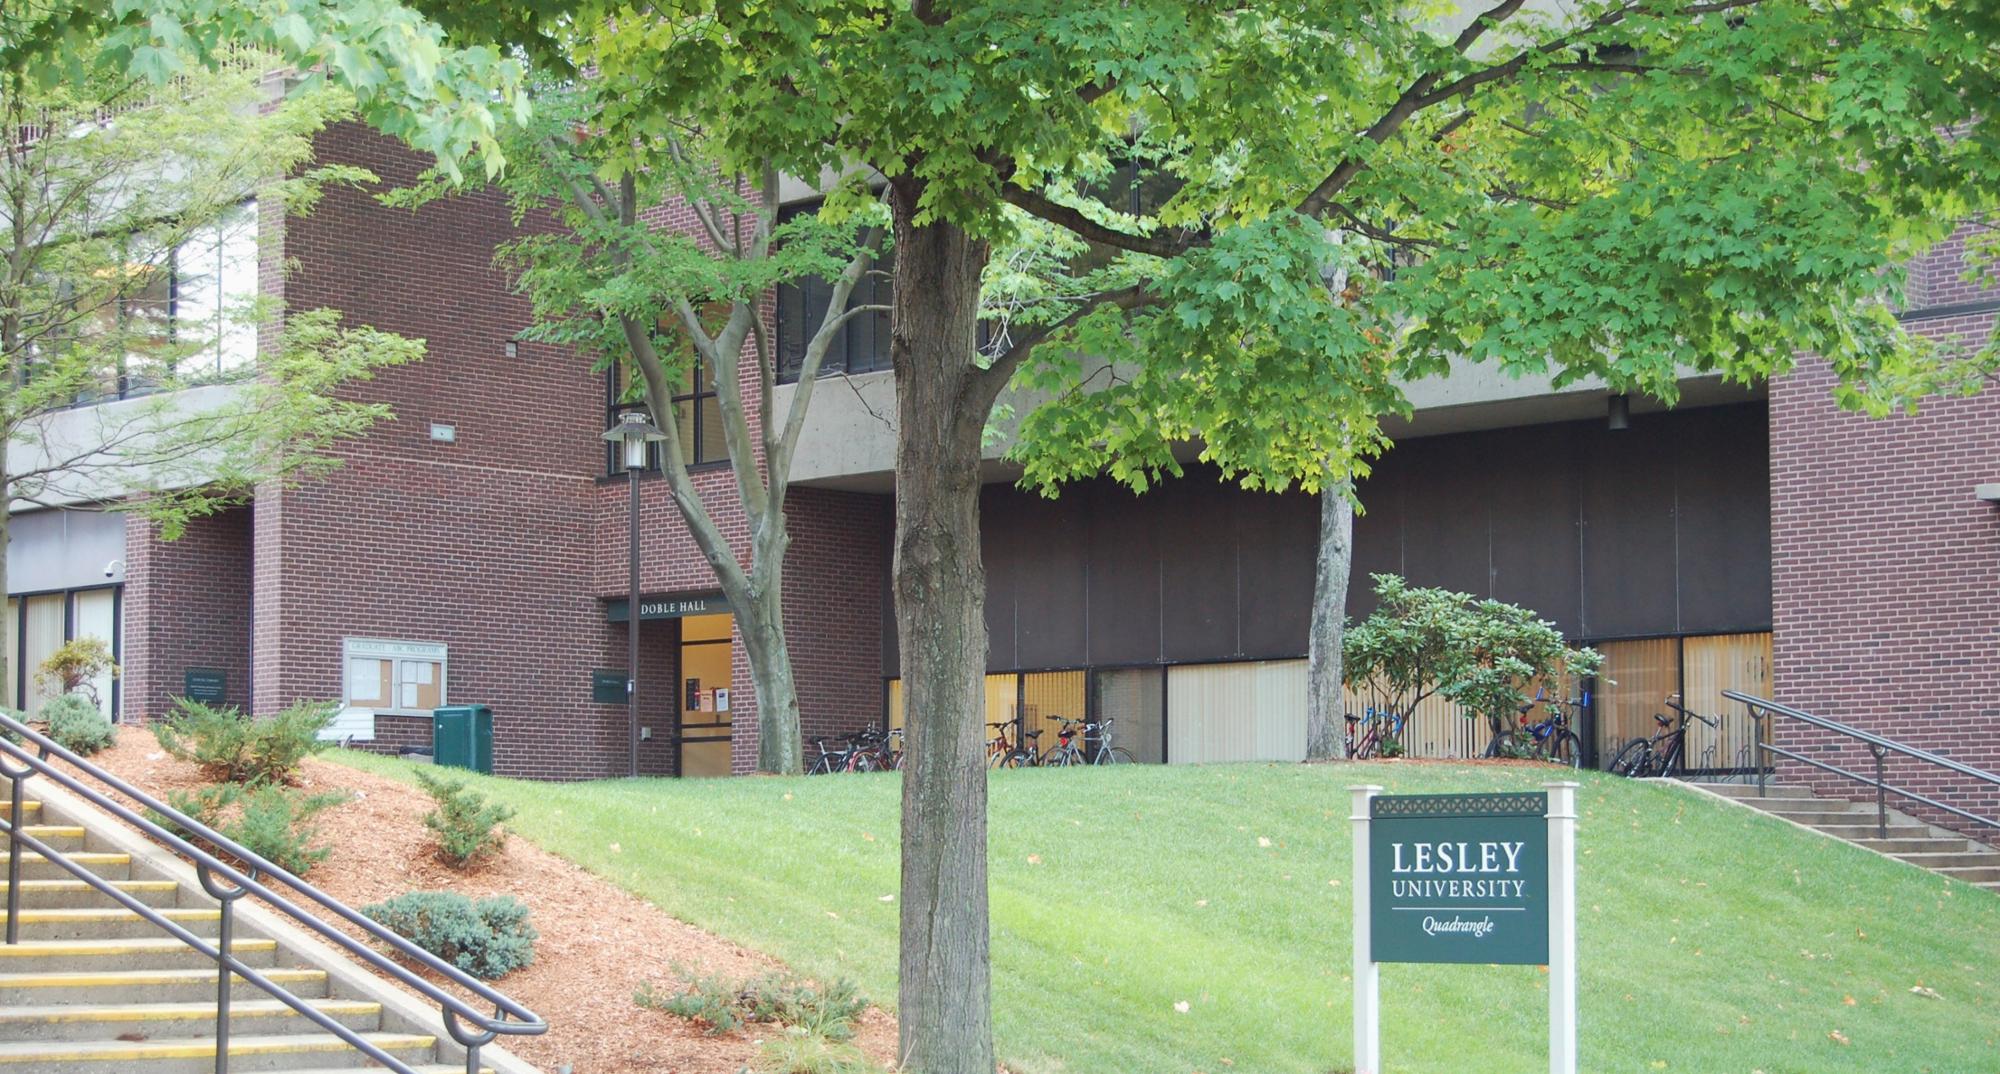 Lesley University Student Reviews, Scholarships, and Details